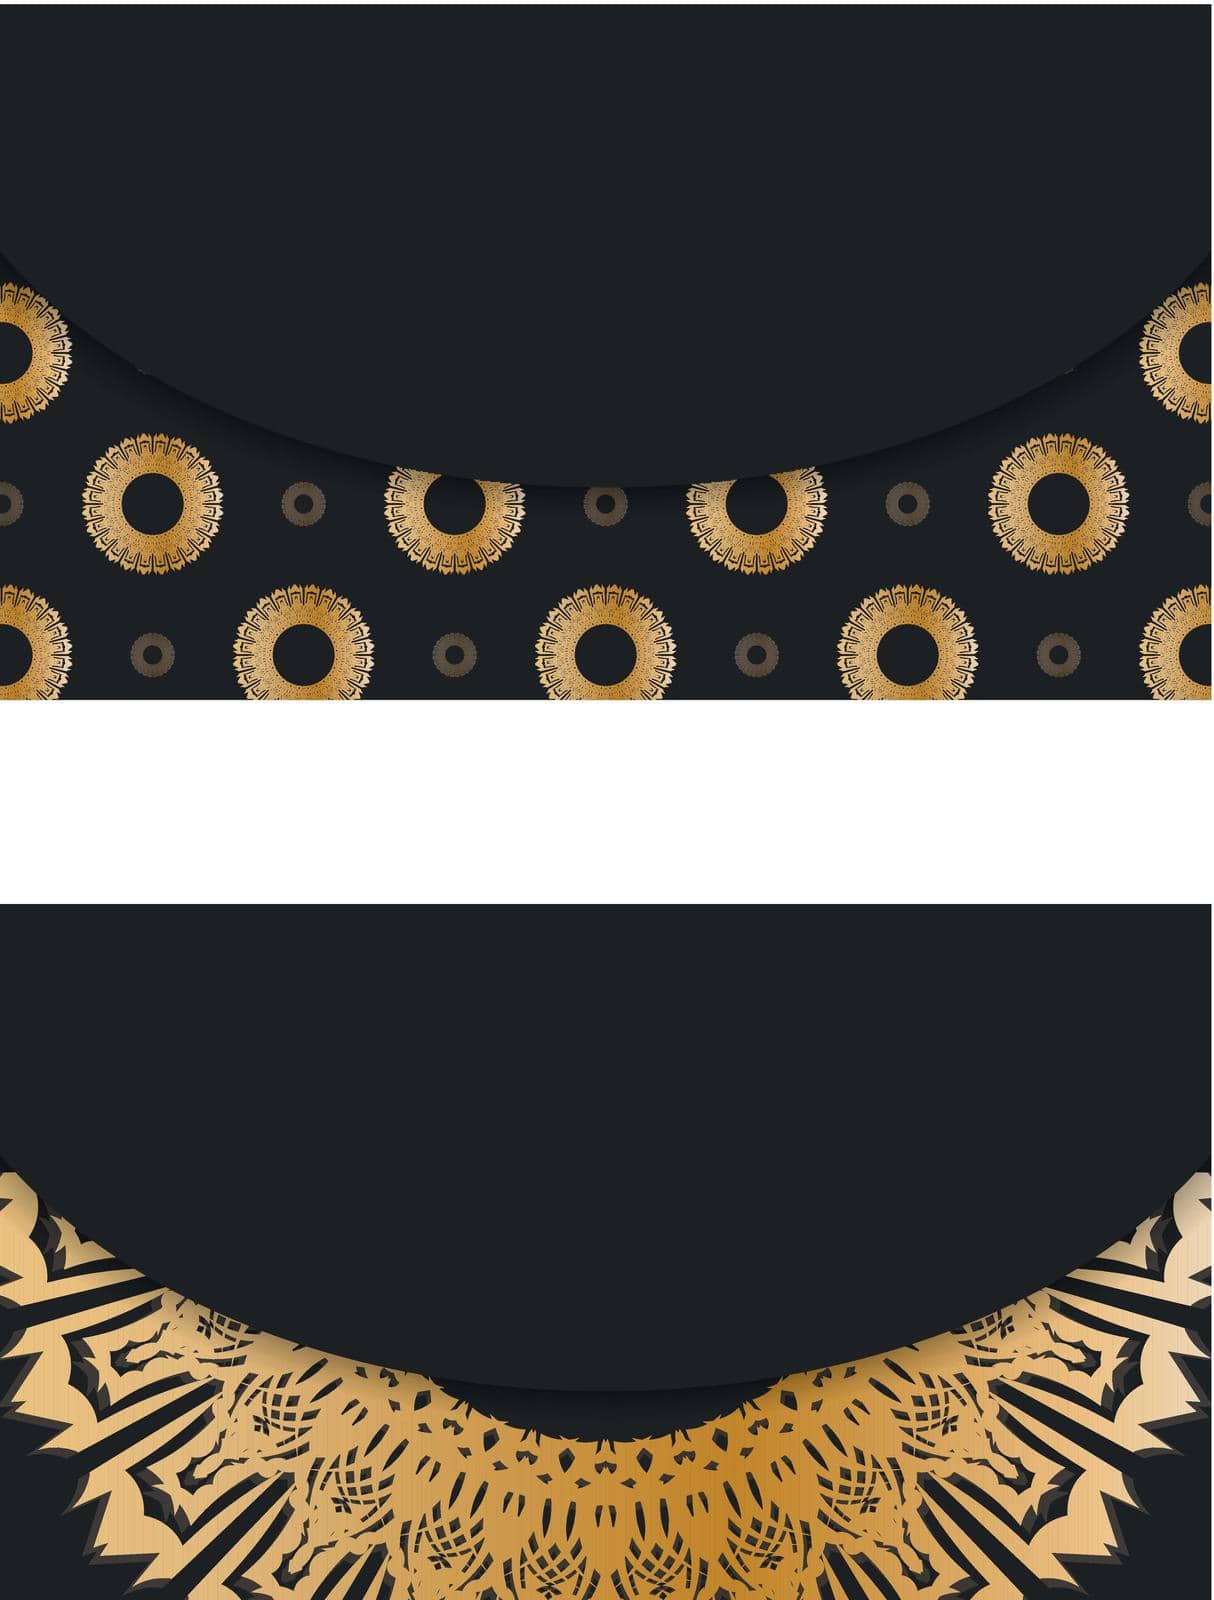 Black business card with luxurious gold ornaments for your brand.